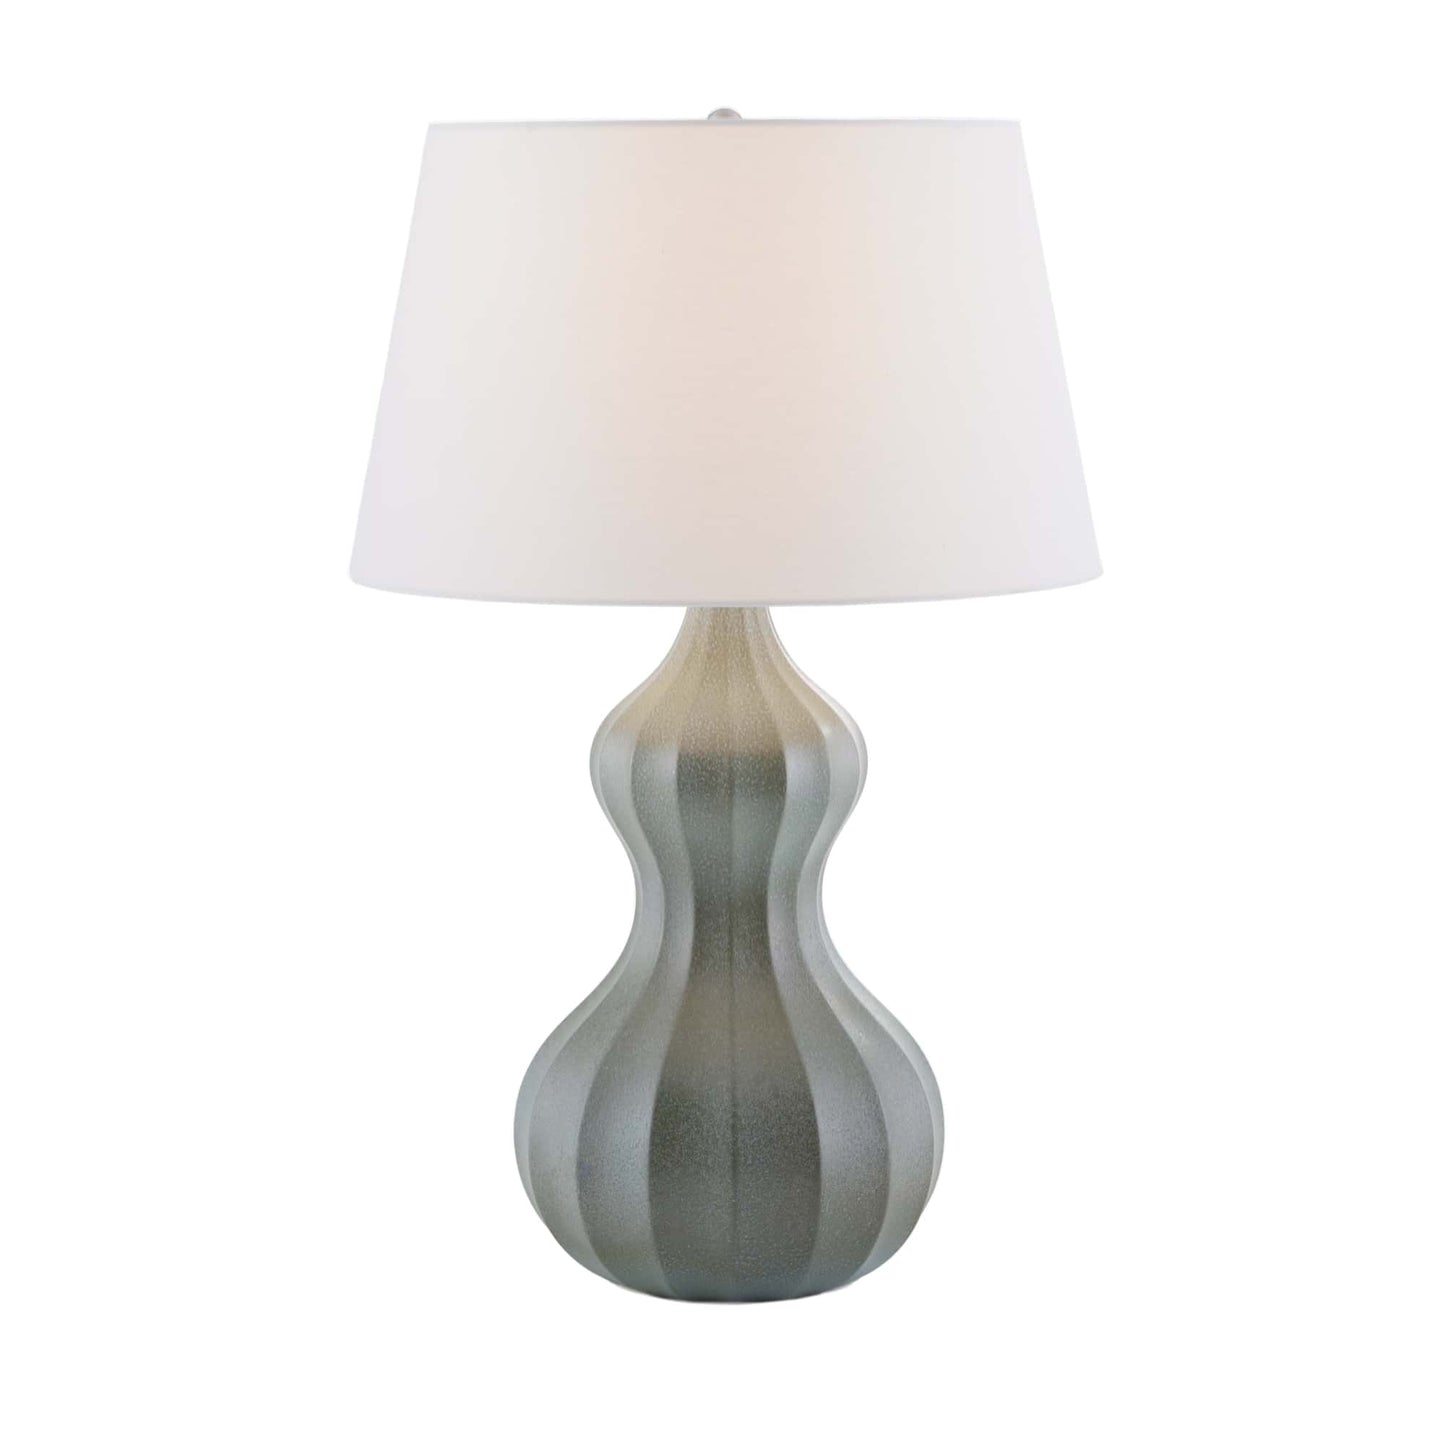 Shirley Lamp - Seafoam Reactive Porcelain Table Lamp with Cactus-Inspired Design